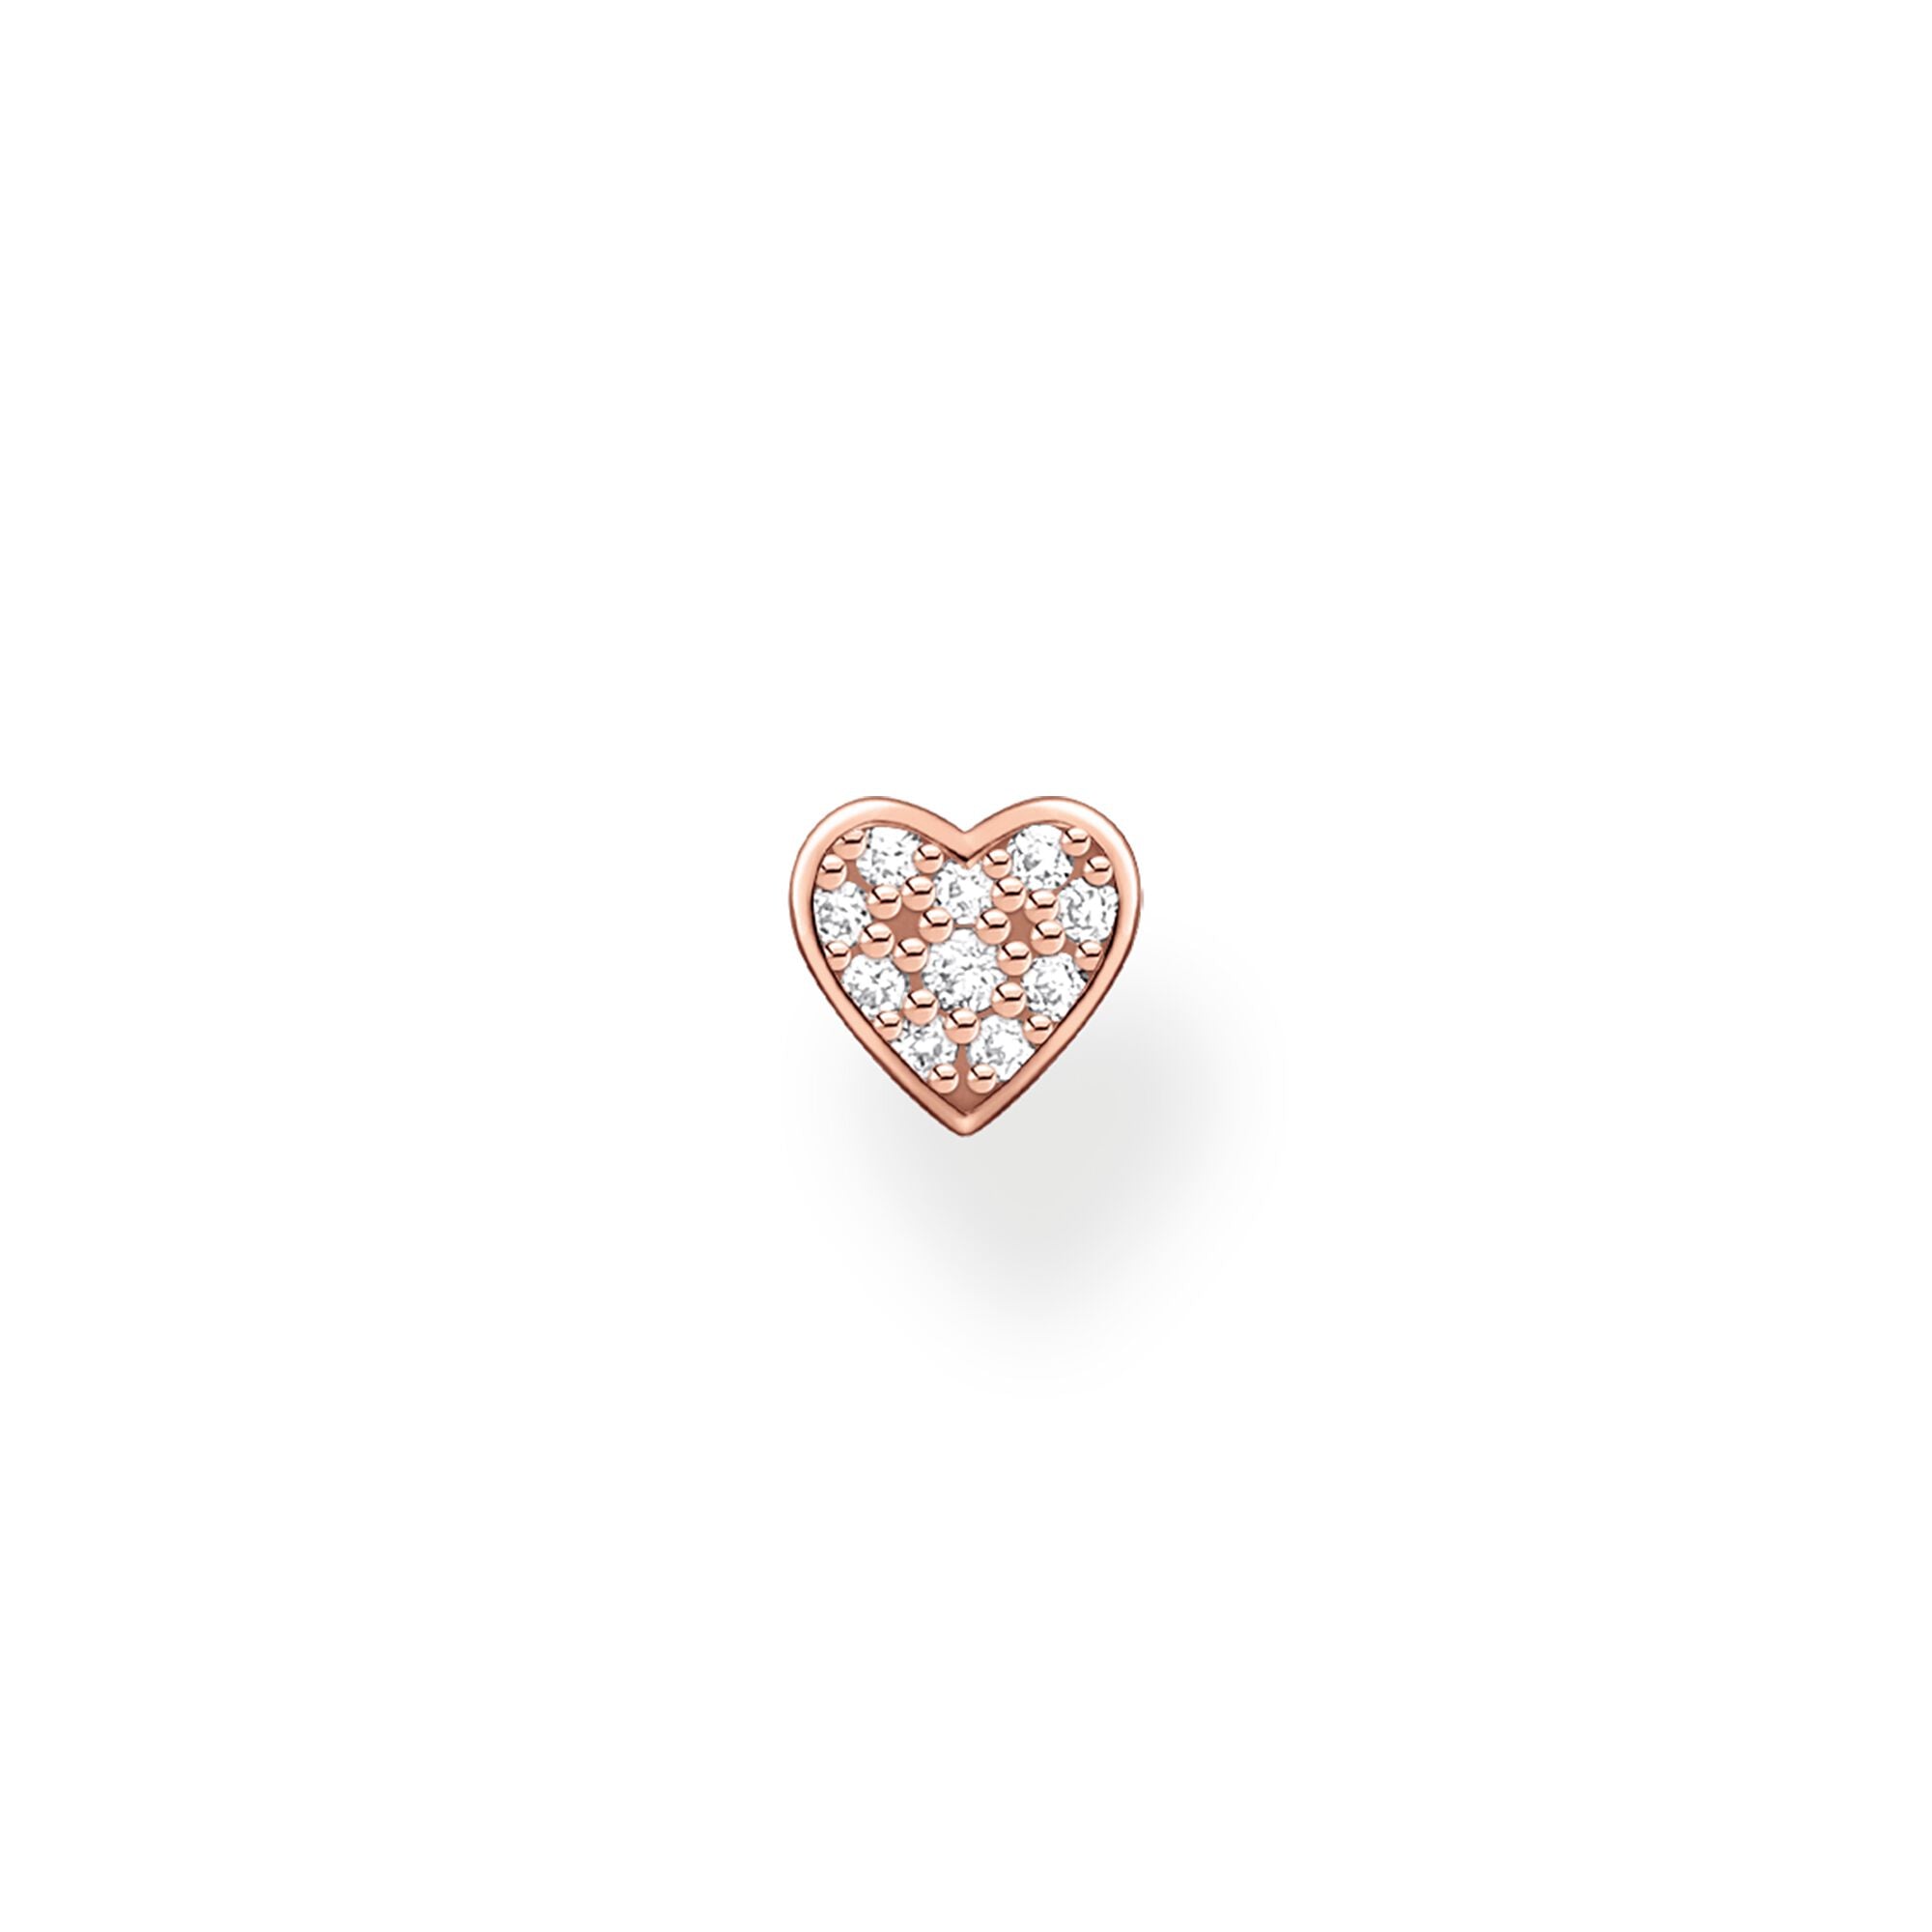 Thomas Sabo, Sterling Silver, Rose Gold Plated, Cubic Zirconia, Pave, Heart, Single Earring Stud, Push backing, Ottawa